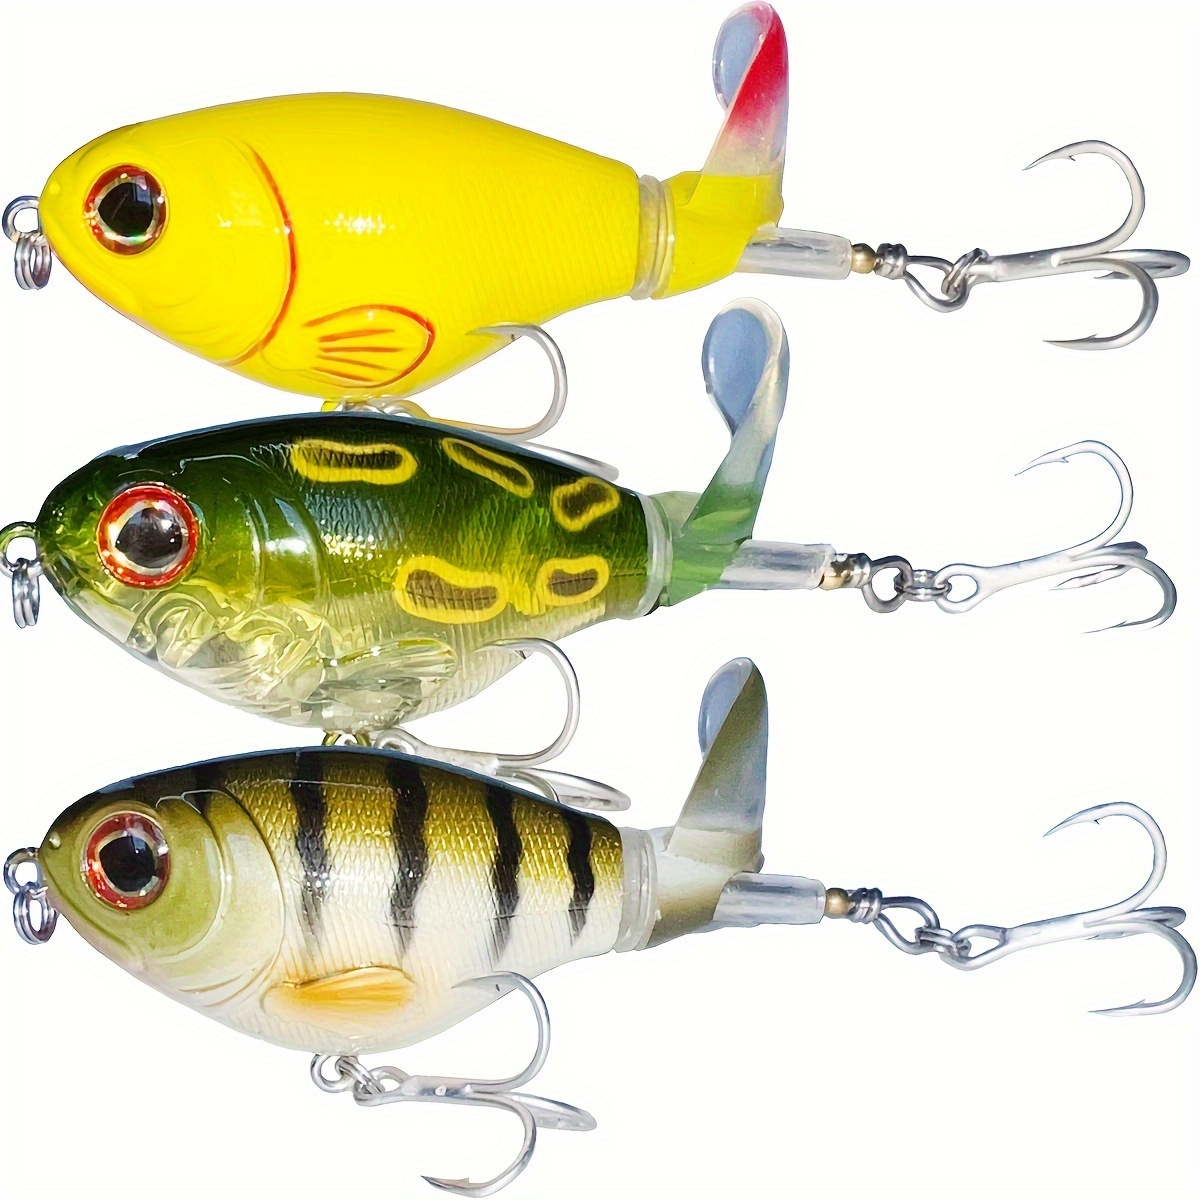 75mm/17g Fishing Lures With Propeller Tail Top Water Fishing Baits With  Hooks For Bass Pike Perch - buy 75mm/17g Fishing Lures With Propeller Tail  Top Water Fishing Baits With Hooks For Bass